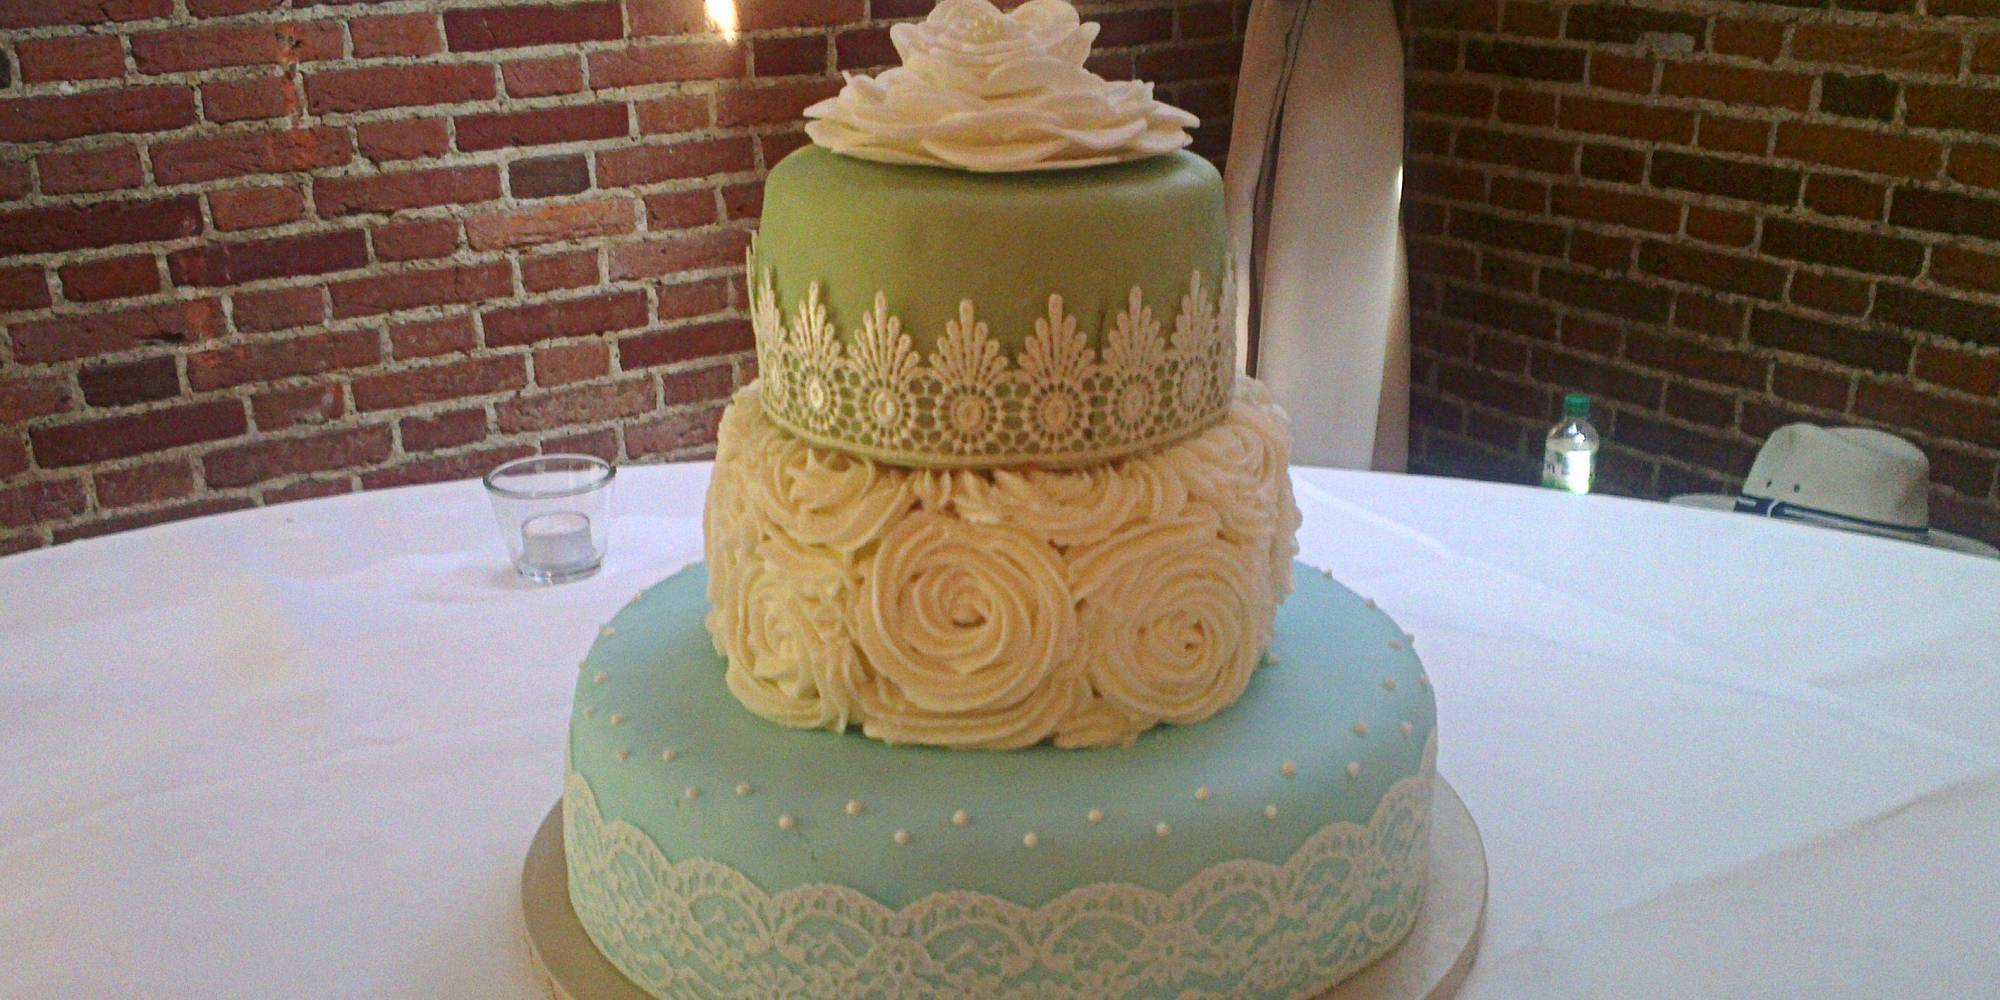 Wedding Cakes Ingredients
 18 Wedding Cakes That Prove Love Is The Best Ingre nt